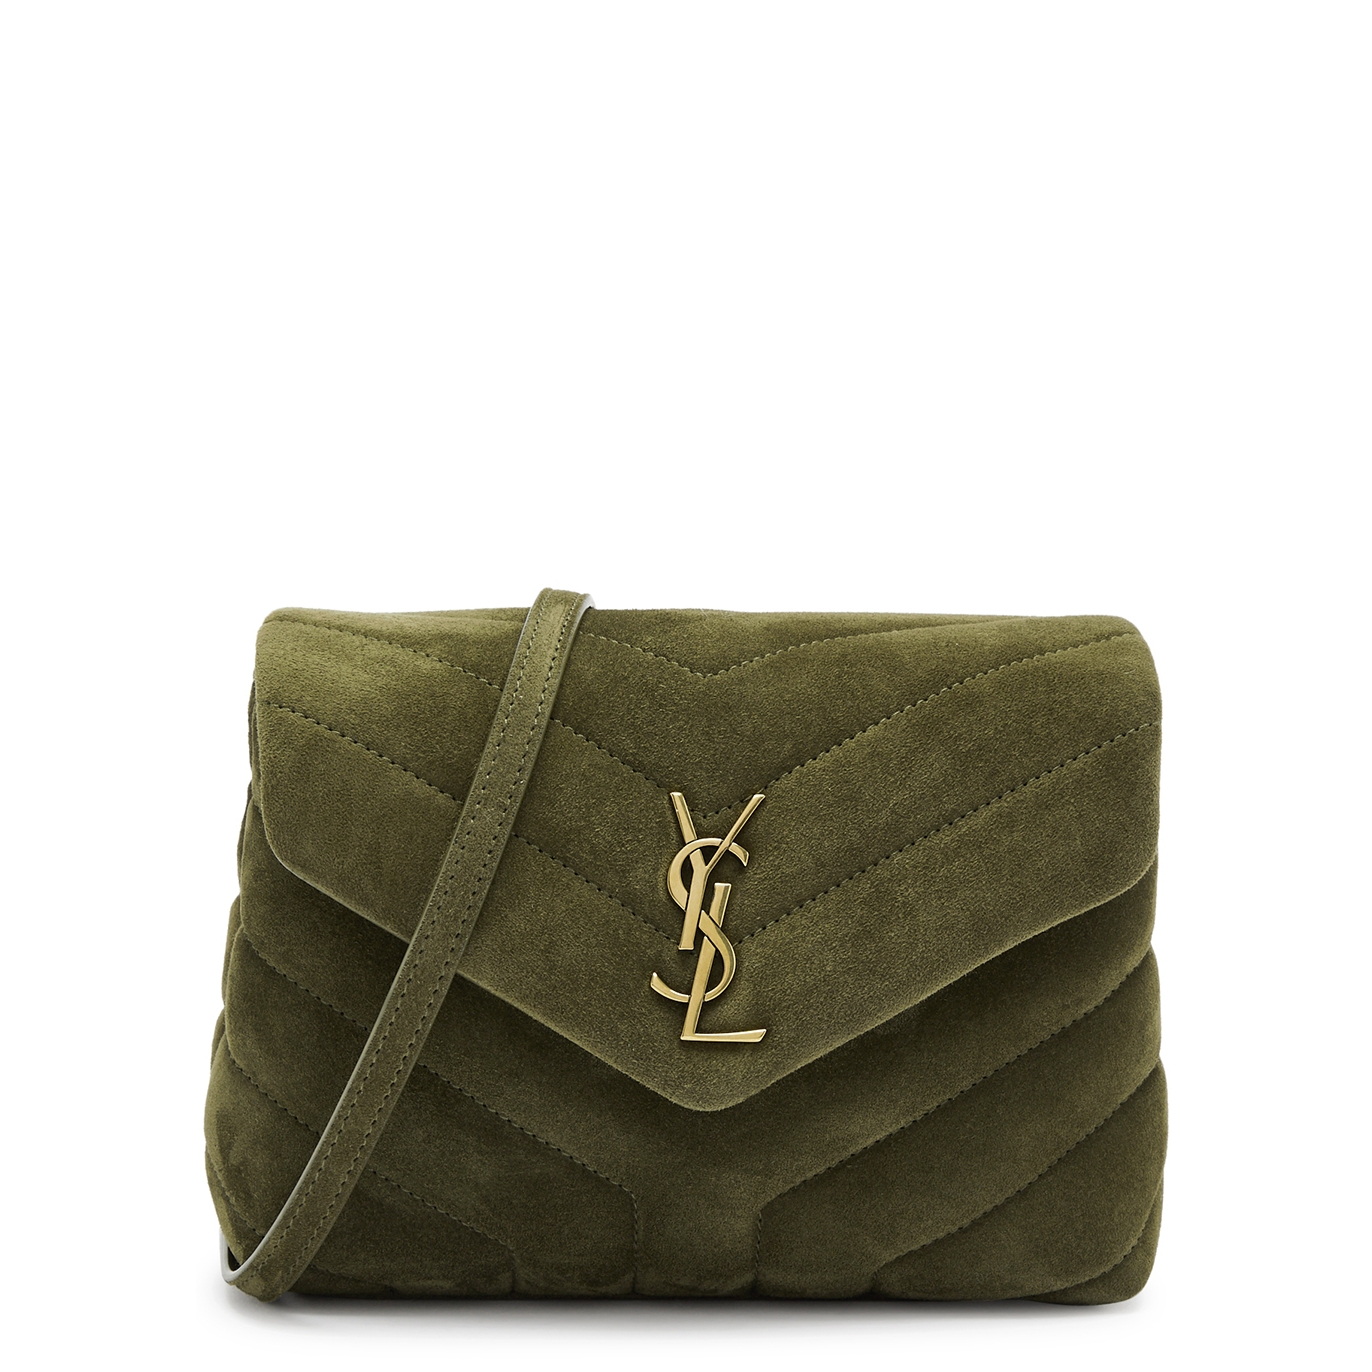 Saint Laurent Loulou Toy Quilted Suede Cross-body Bag - Olive